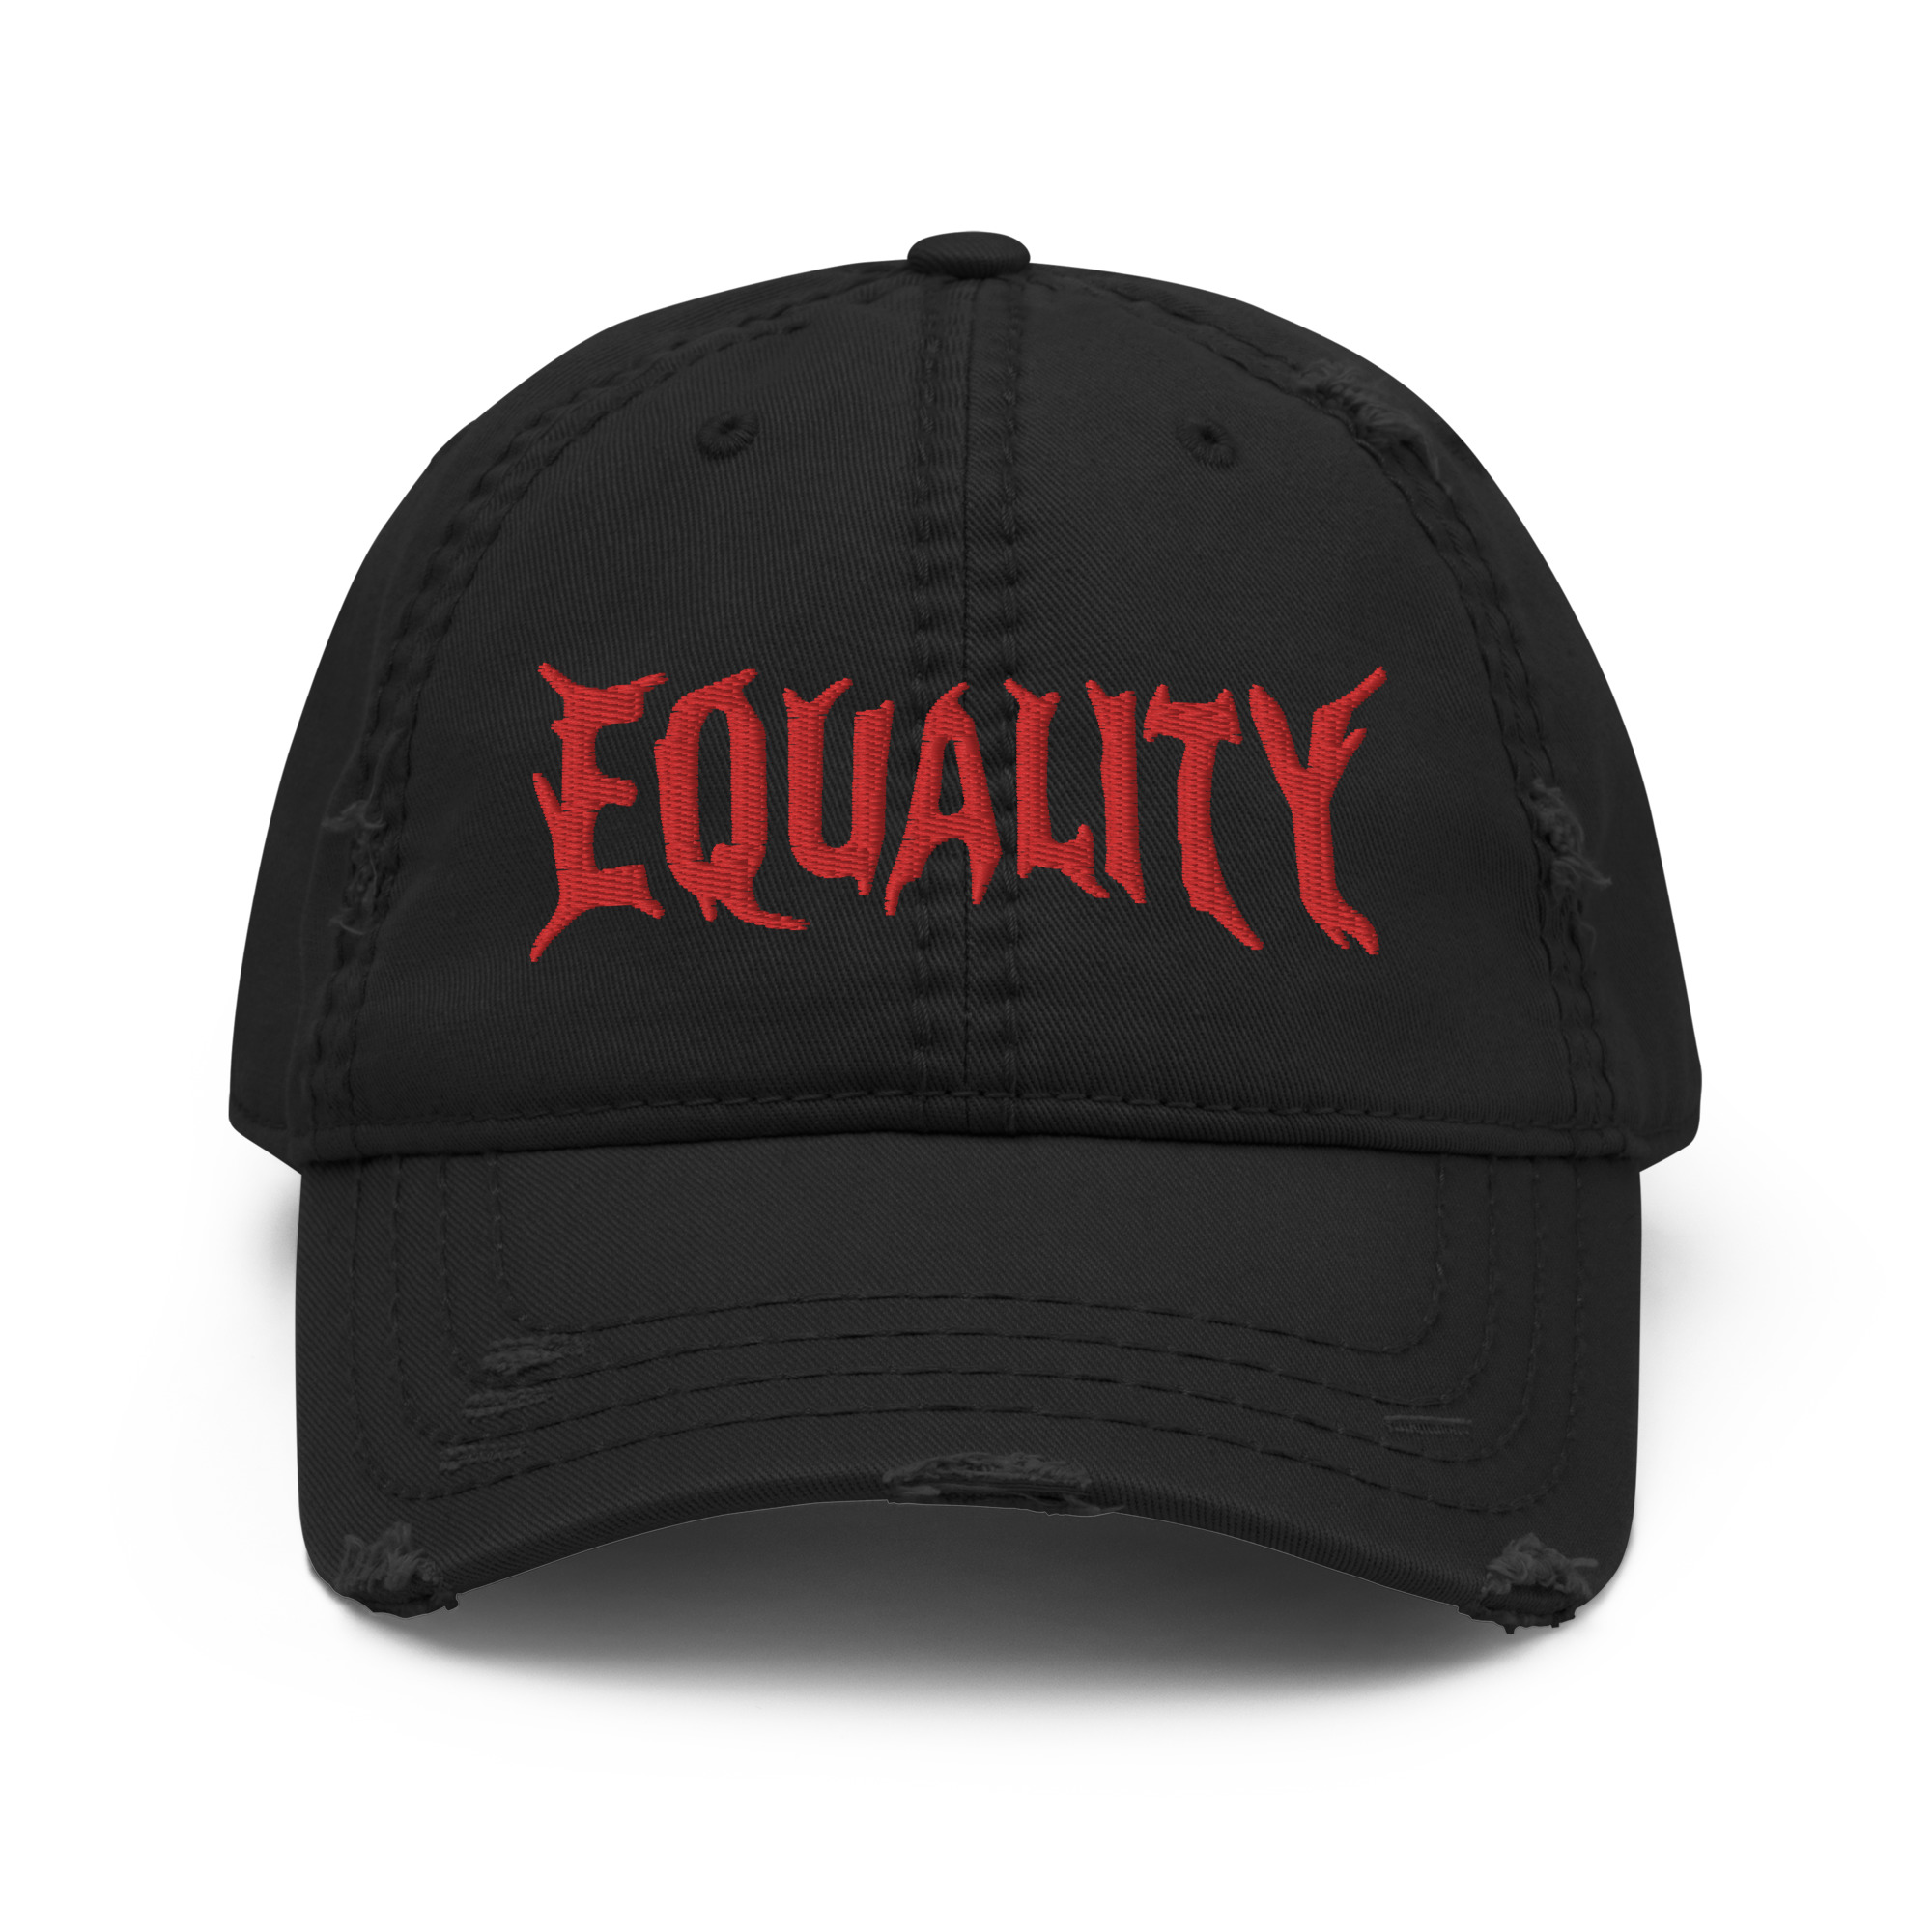 Equality - Distressed Dad Hat